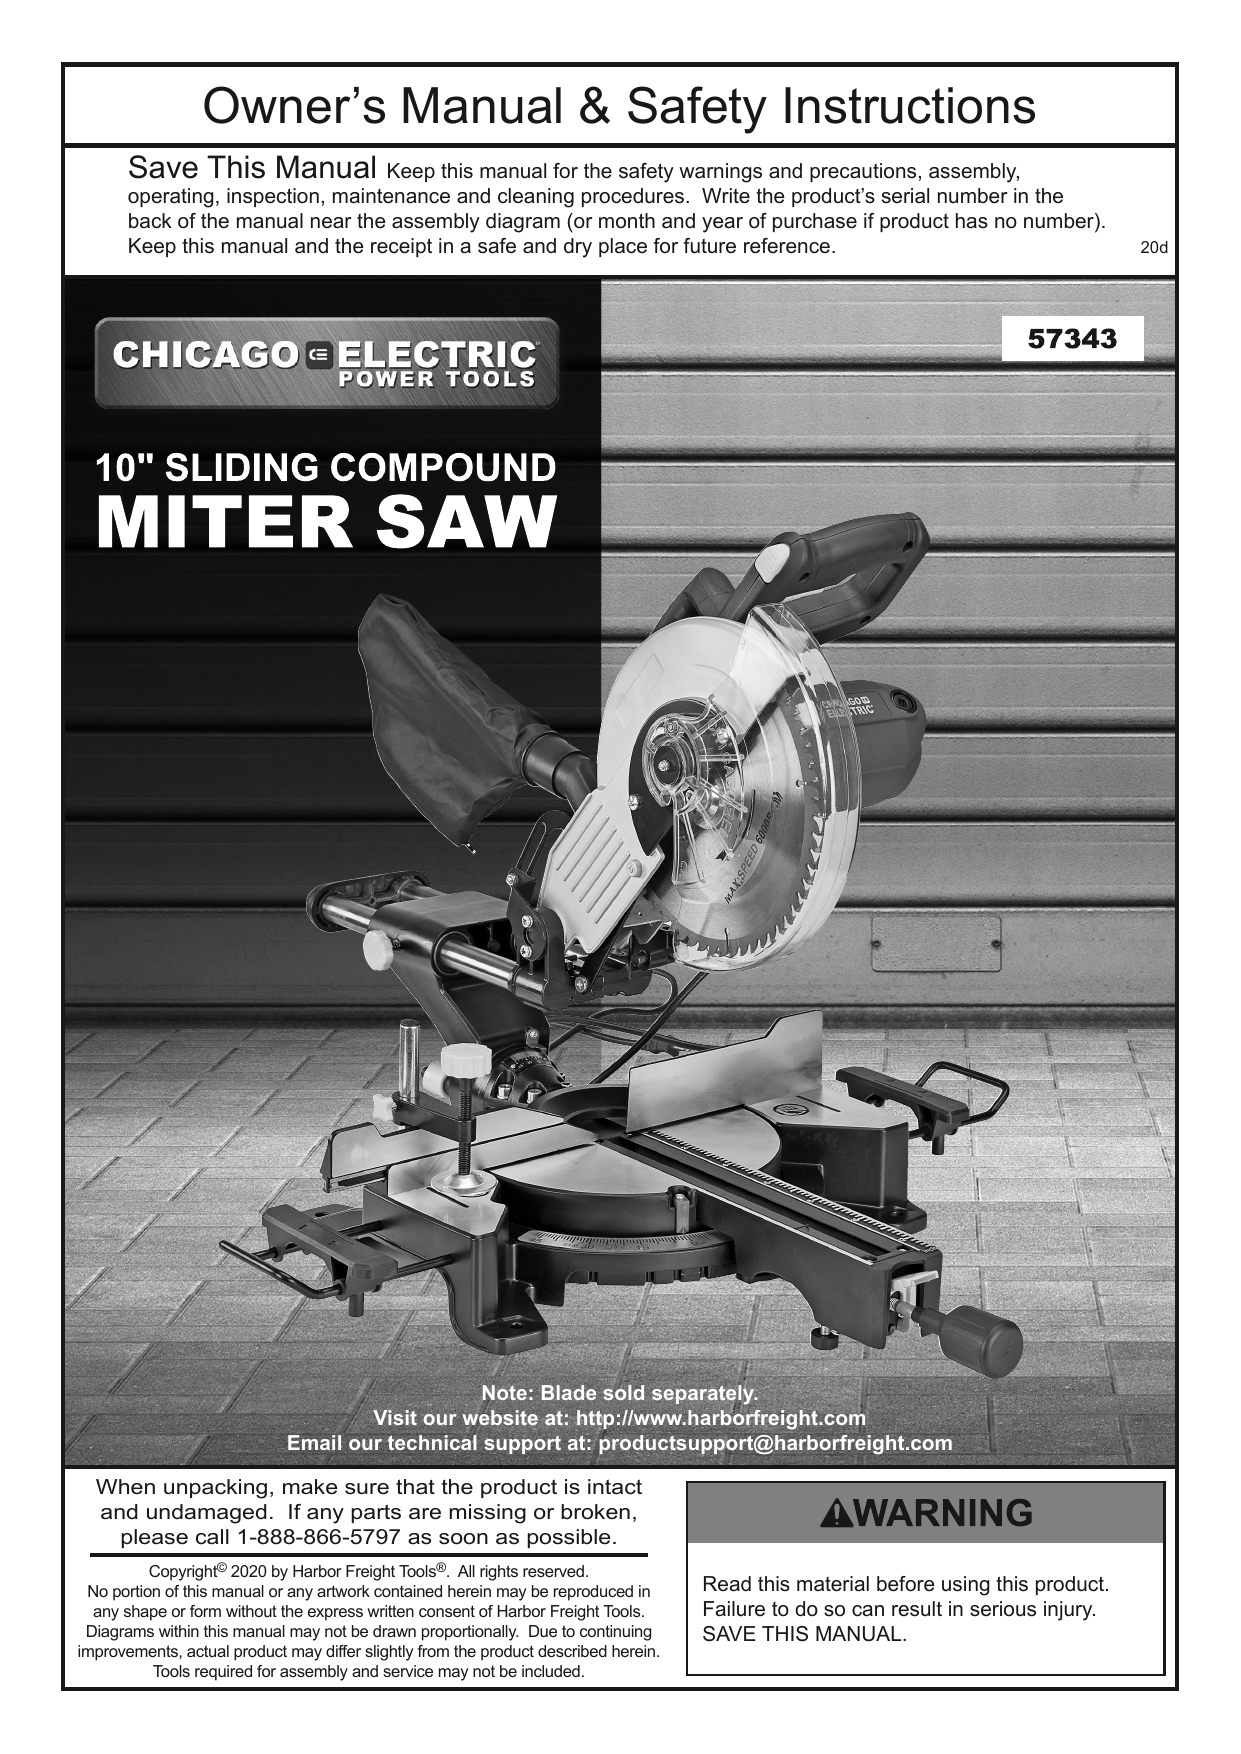 Chicago Electric 57343 10 in. Sliding Compound Miter Saw Owner's Manual